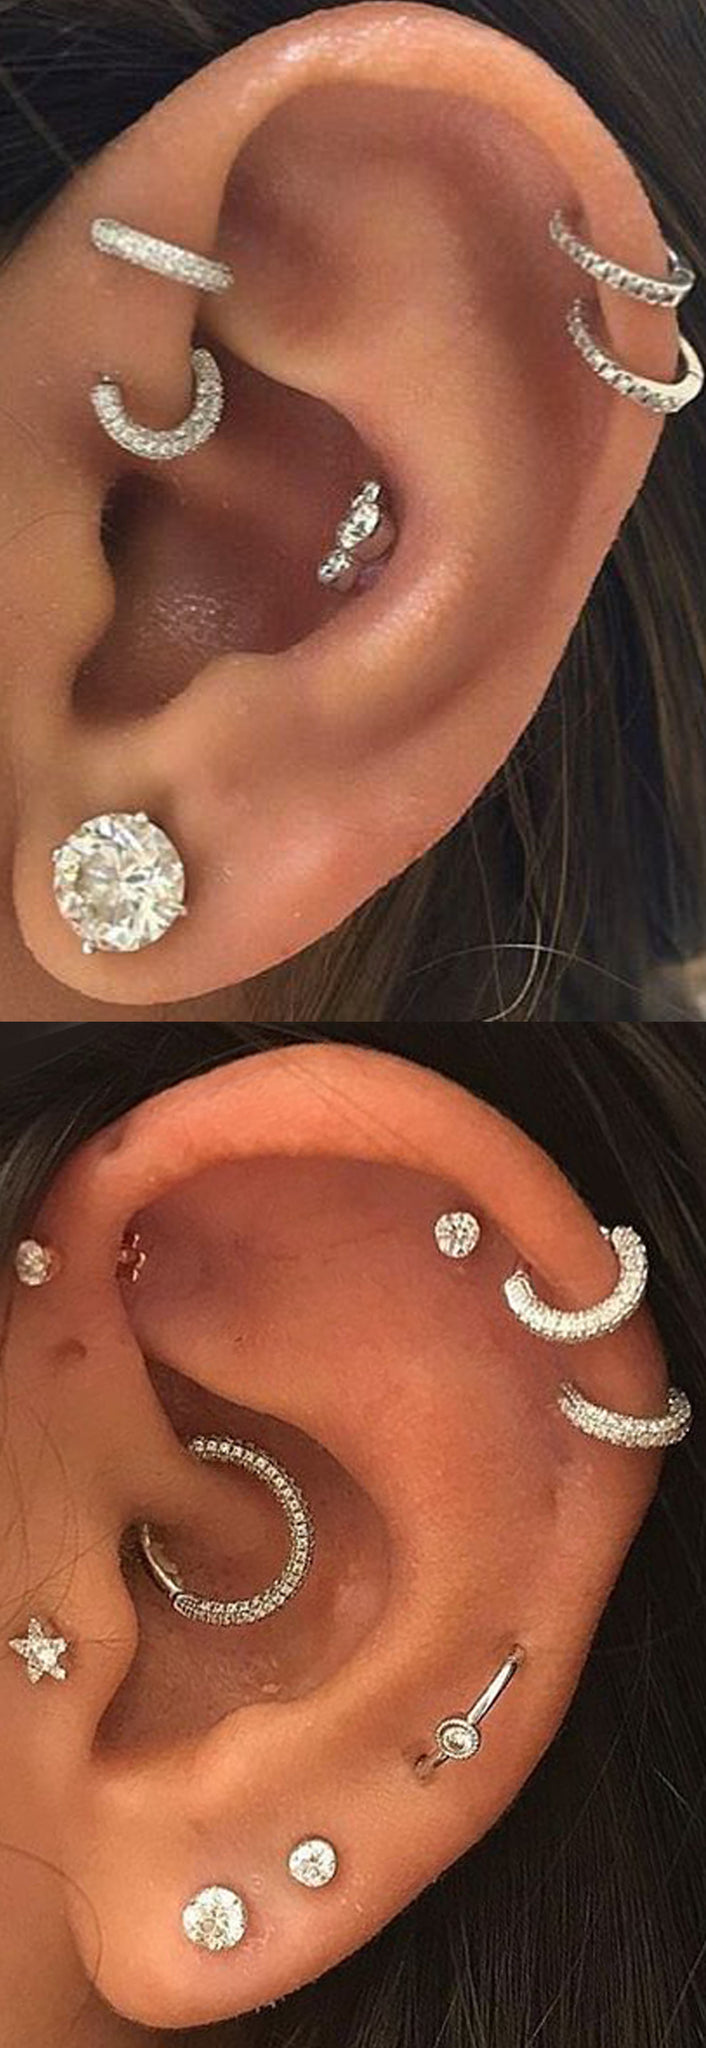 Popular Ear Piercing Ideas at MyBodiArt.com - Silver Double Forward Helix Earring - Double Cartilage Rings 16G - Rook Piercing - Daith Jewelry